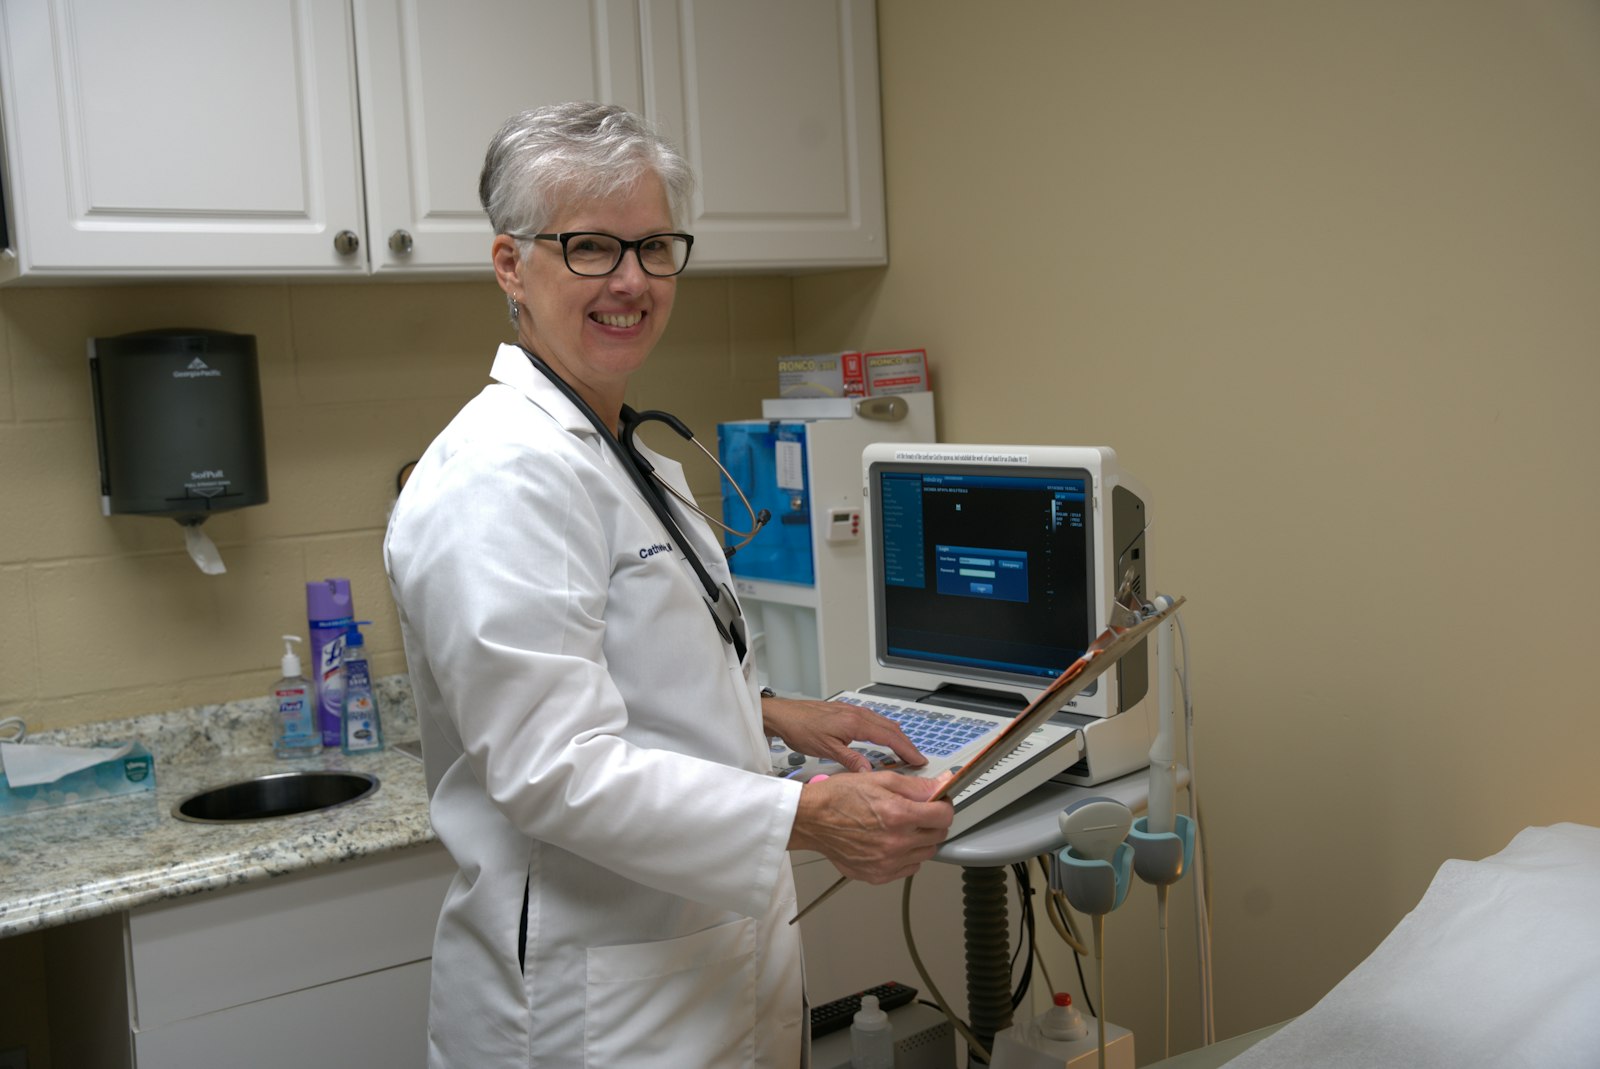 Dr. Catherine Stark, OB-GYN, stands in front of an ultrasound machine at Crossroads Care Center in Auburn Hills. Advances in neonatal medicine, as well as better imaging technology with ultrasounds and sonograms, have brought the humanity of the unborn child into clear focus since Roe v. Wade was decided in 1973, Dr. Stark says. (Daniel Meloy | Detroit Catholic)